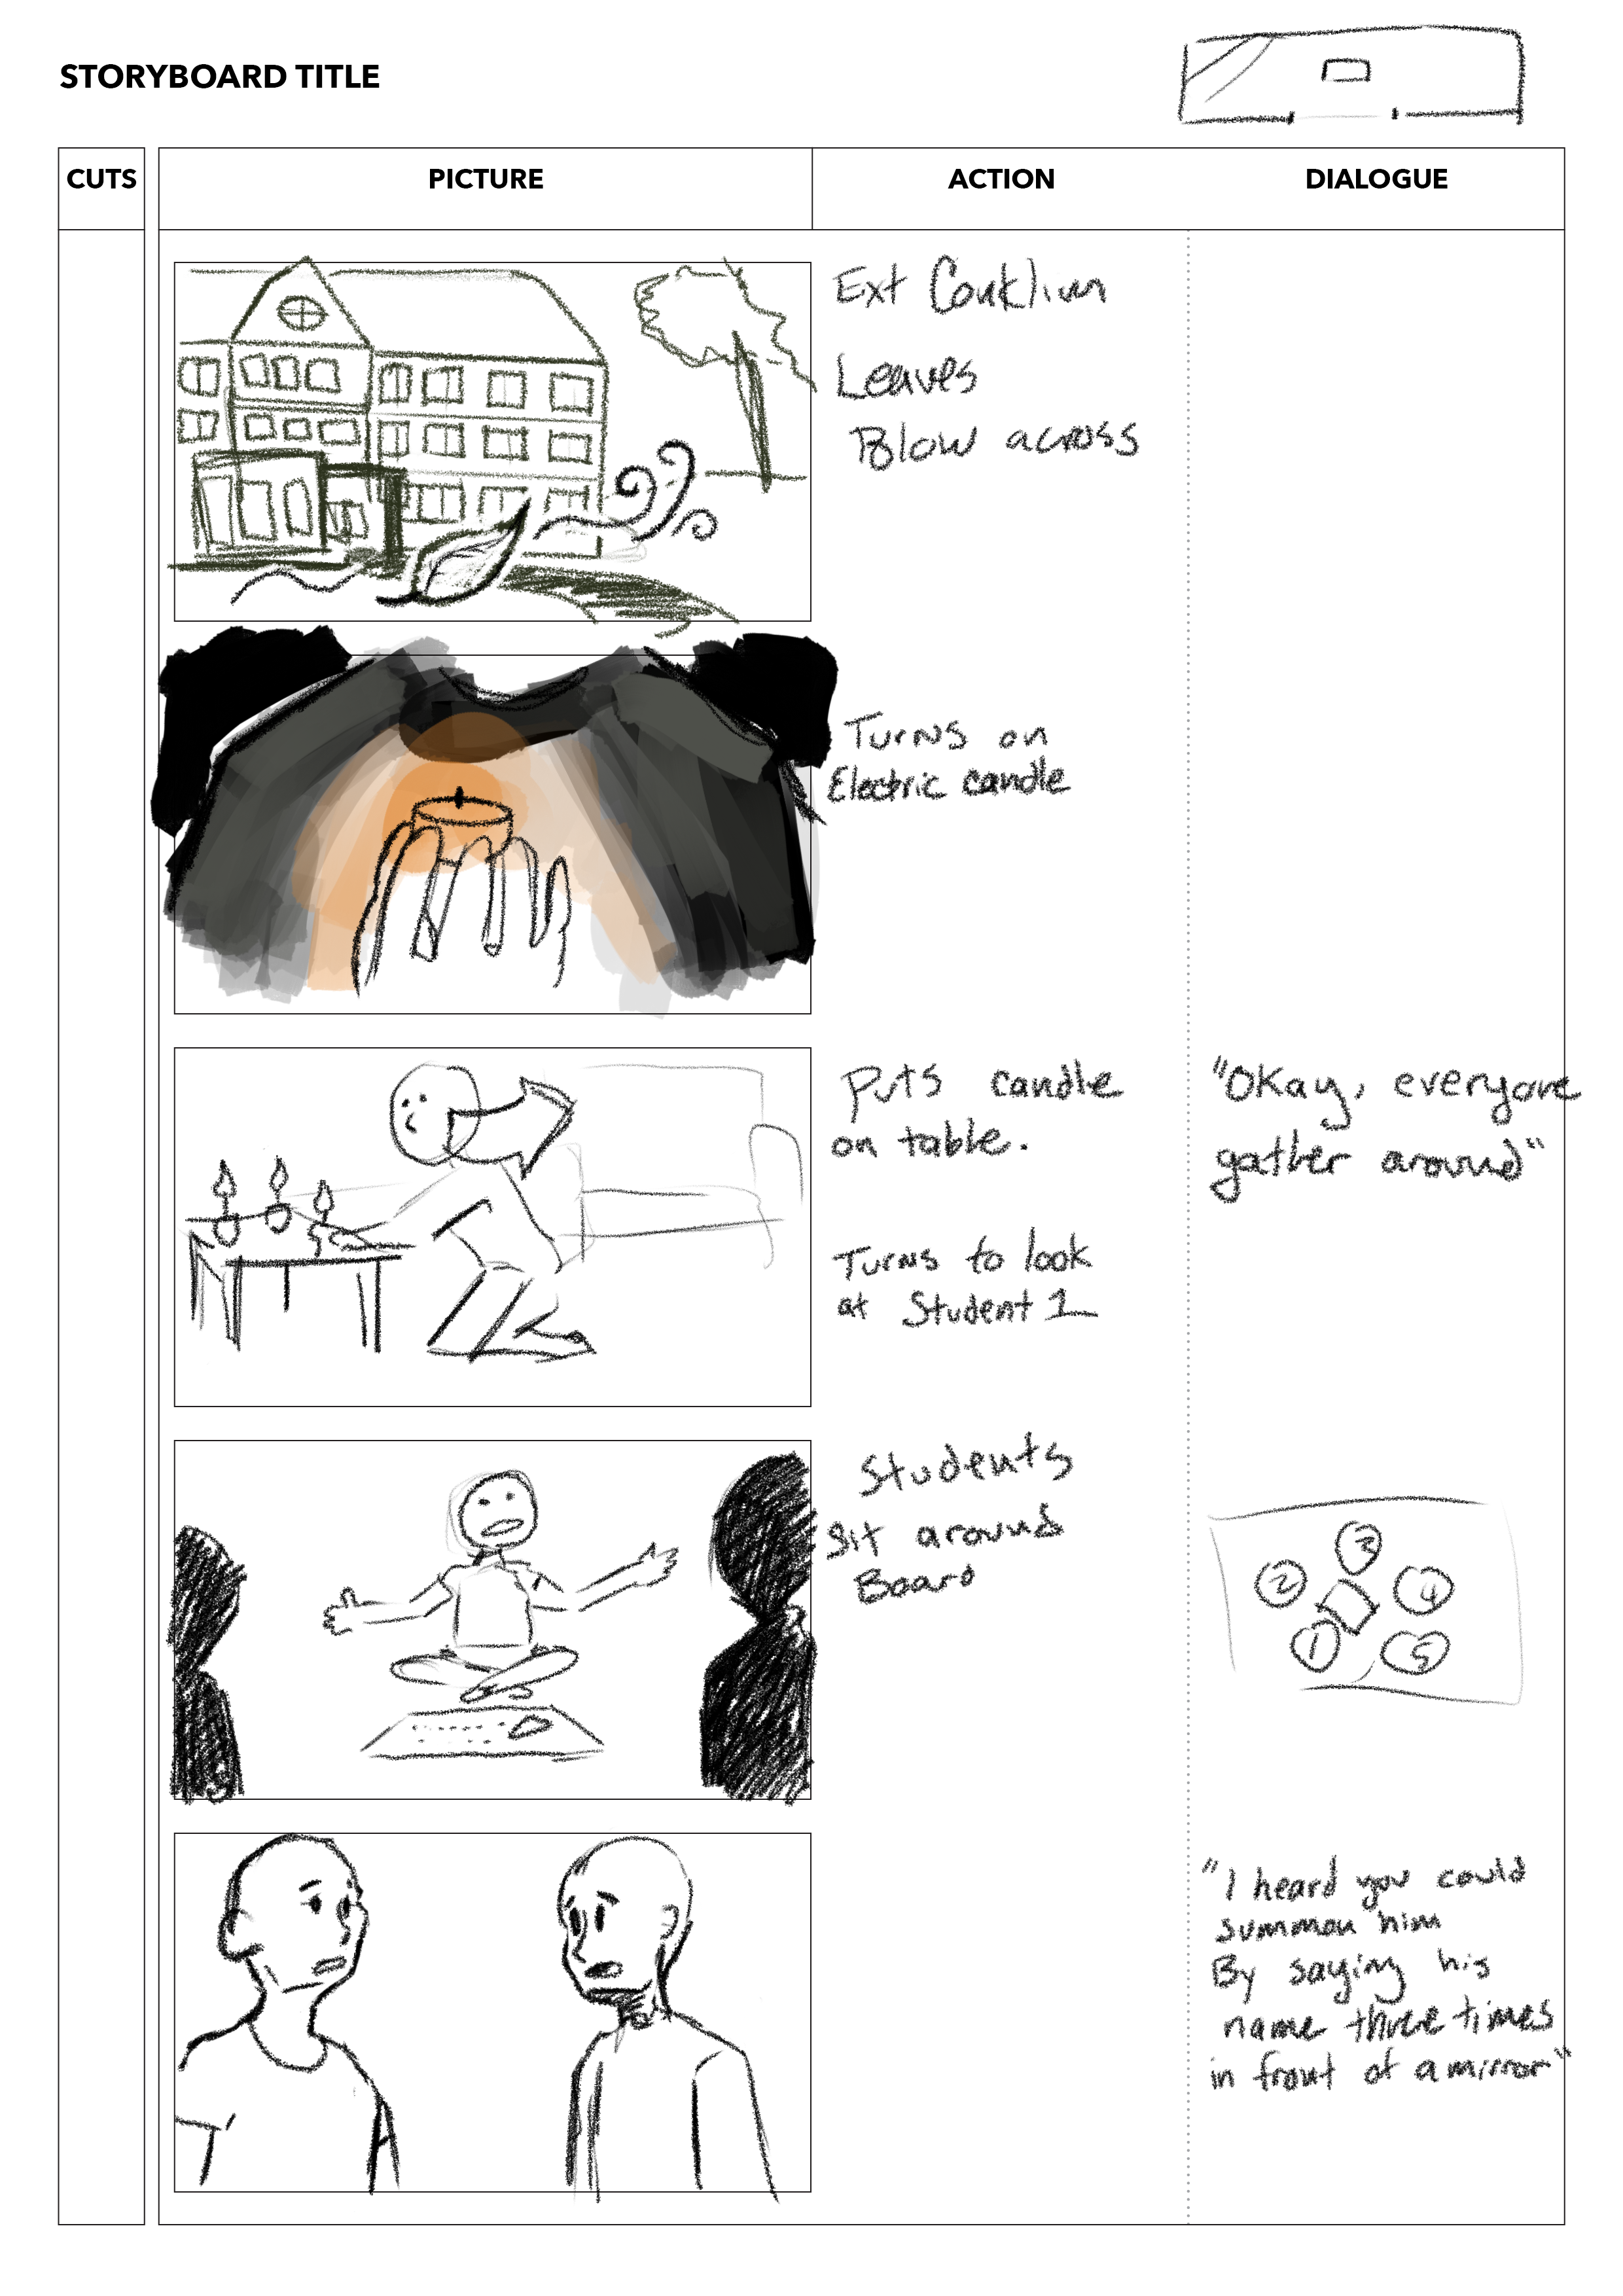 16_9_Storyboard_Template_page 1.png